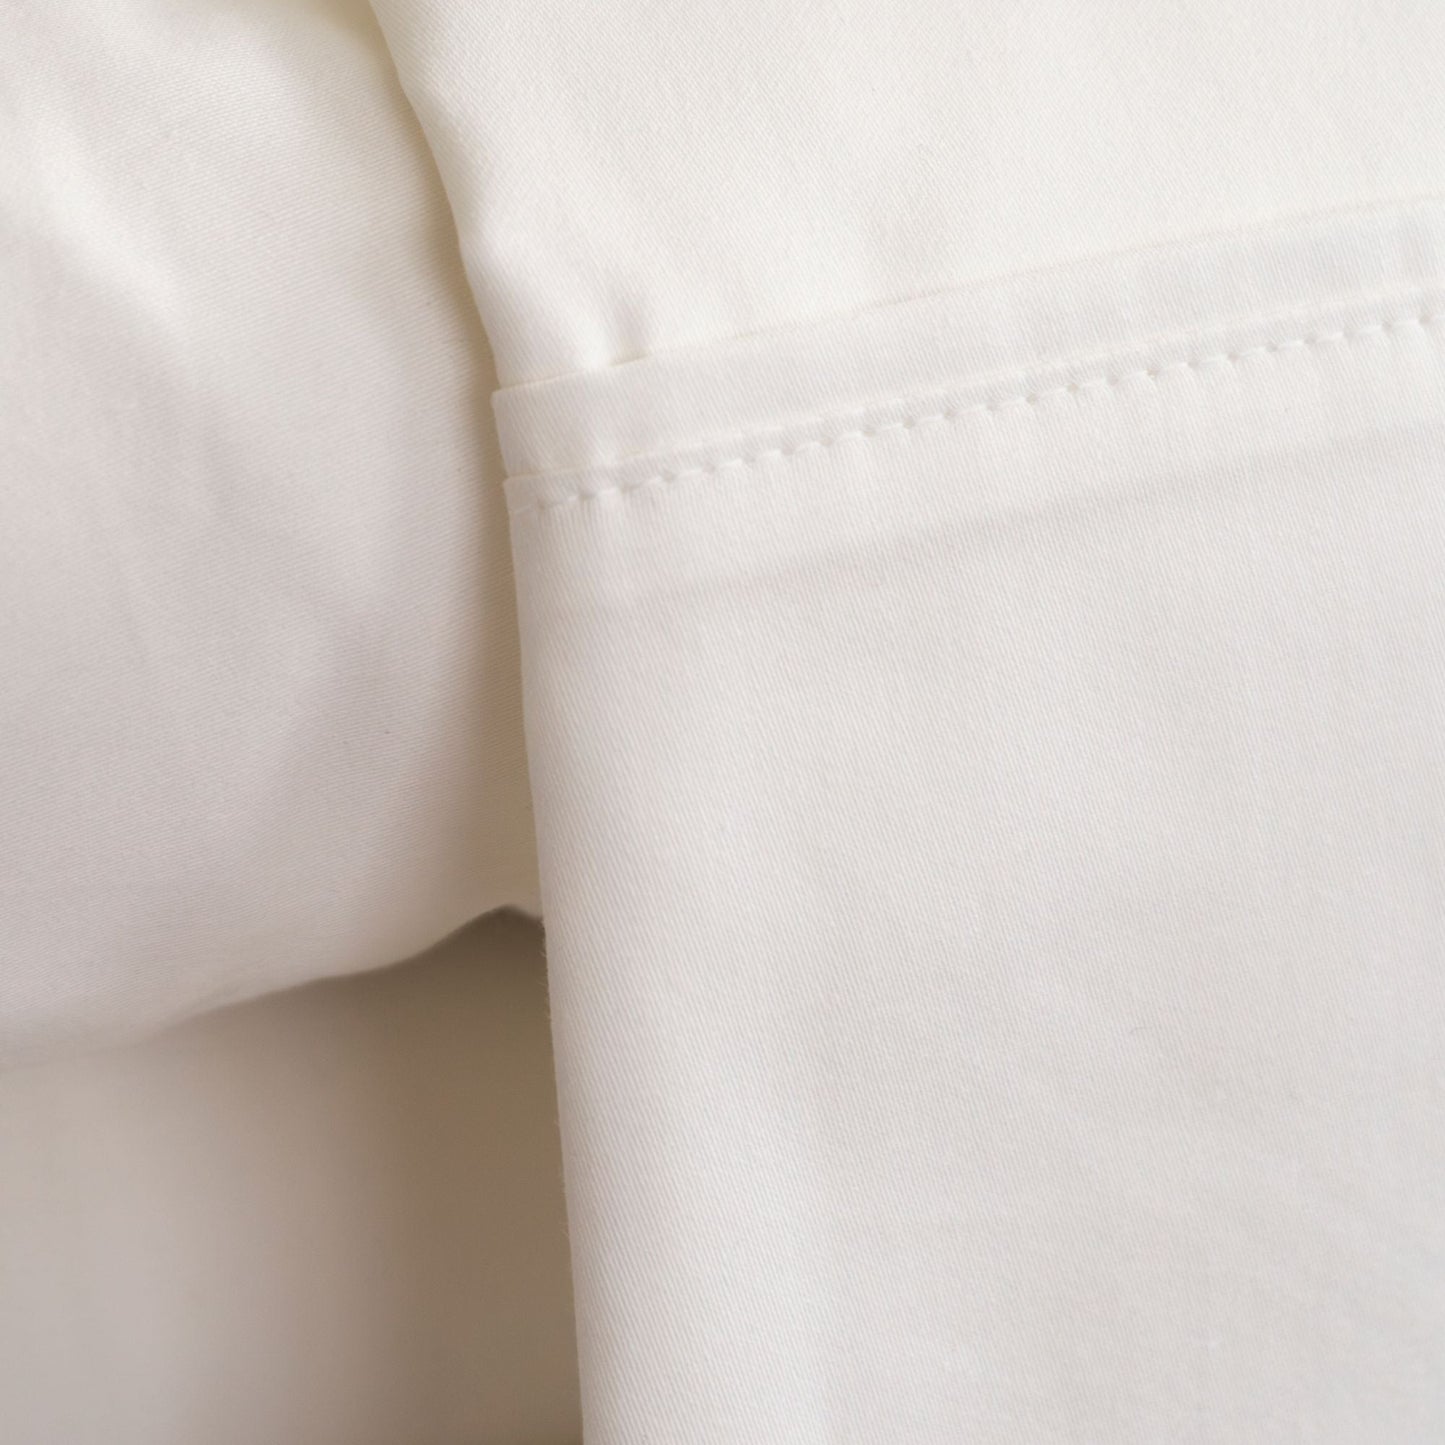 Protect-A-Bed Staynew® Cotton Sheet Set Super King